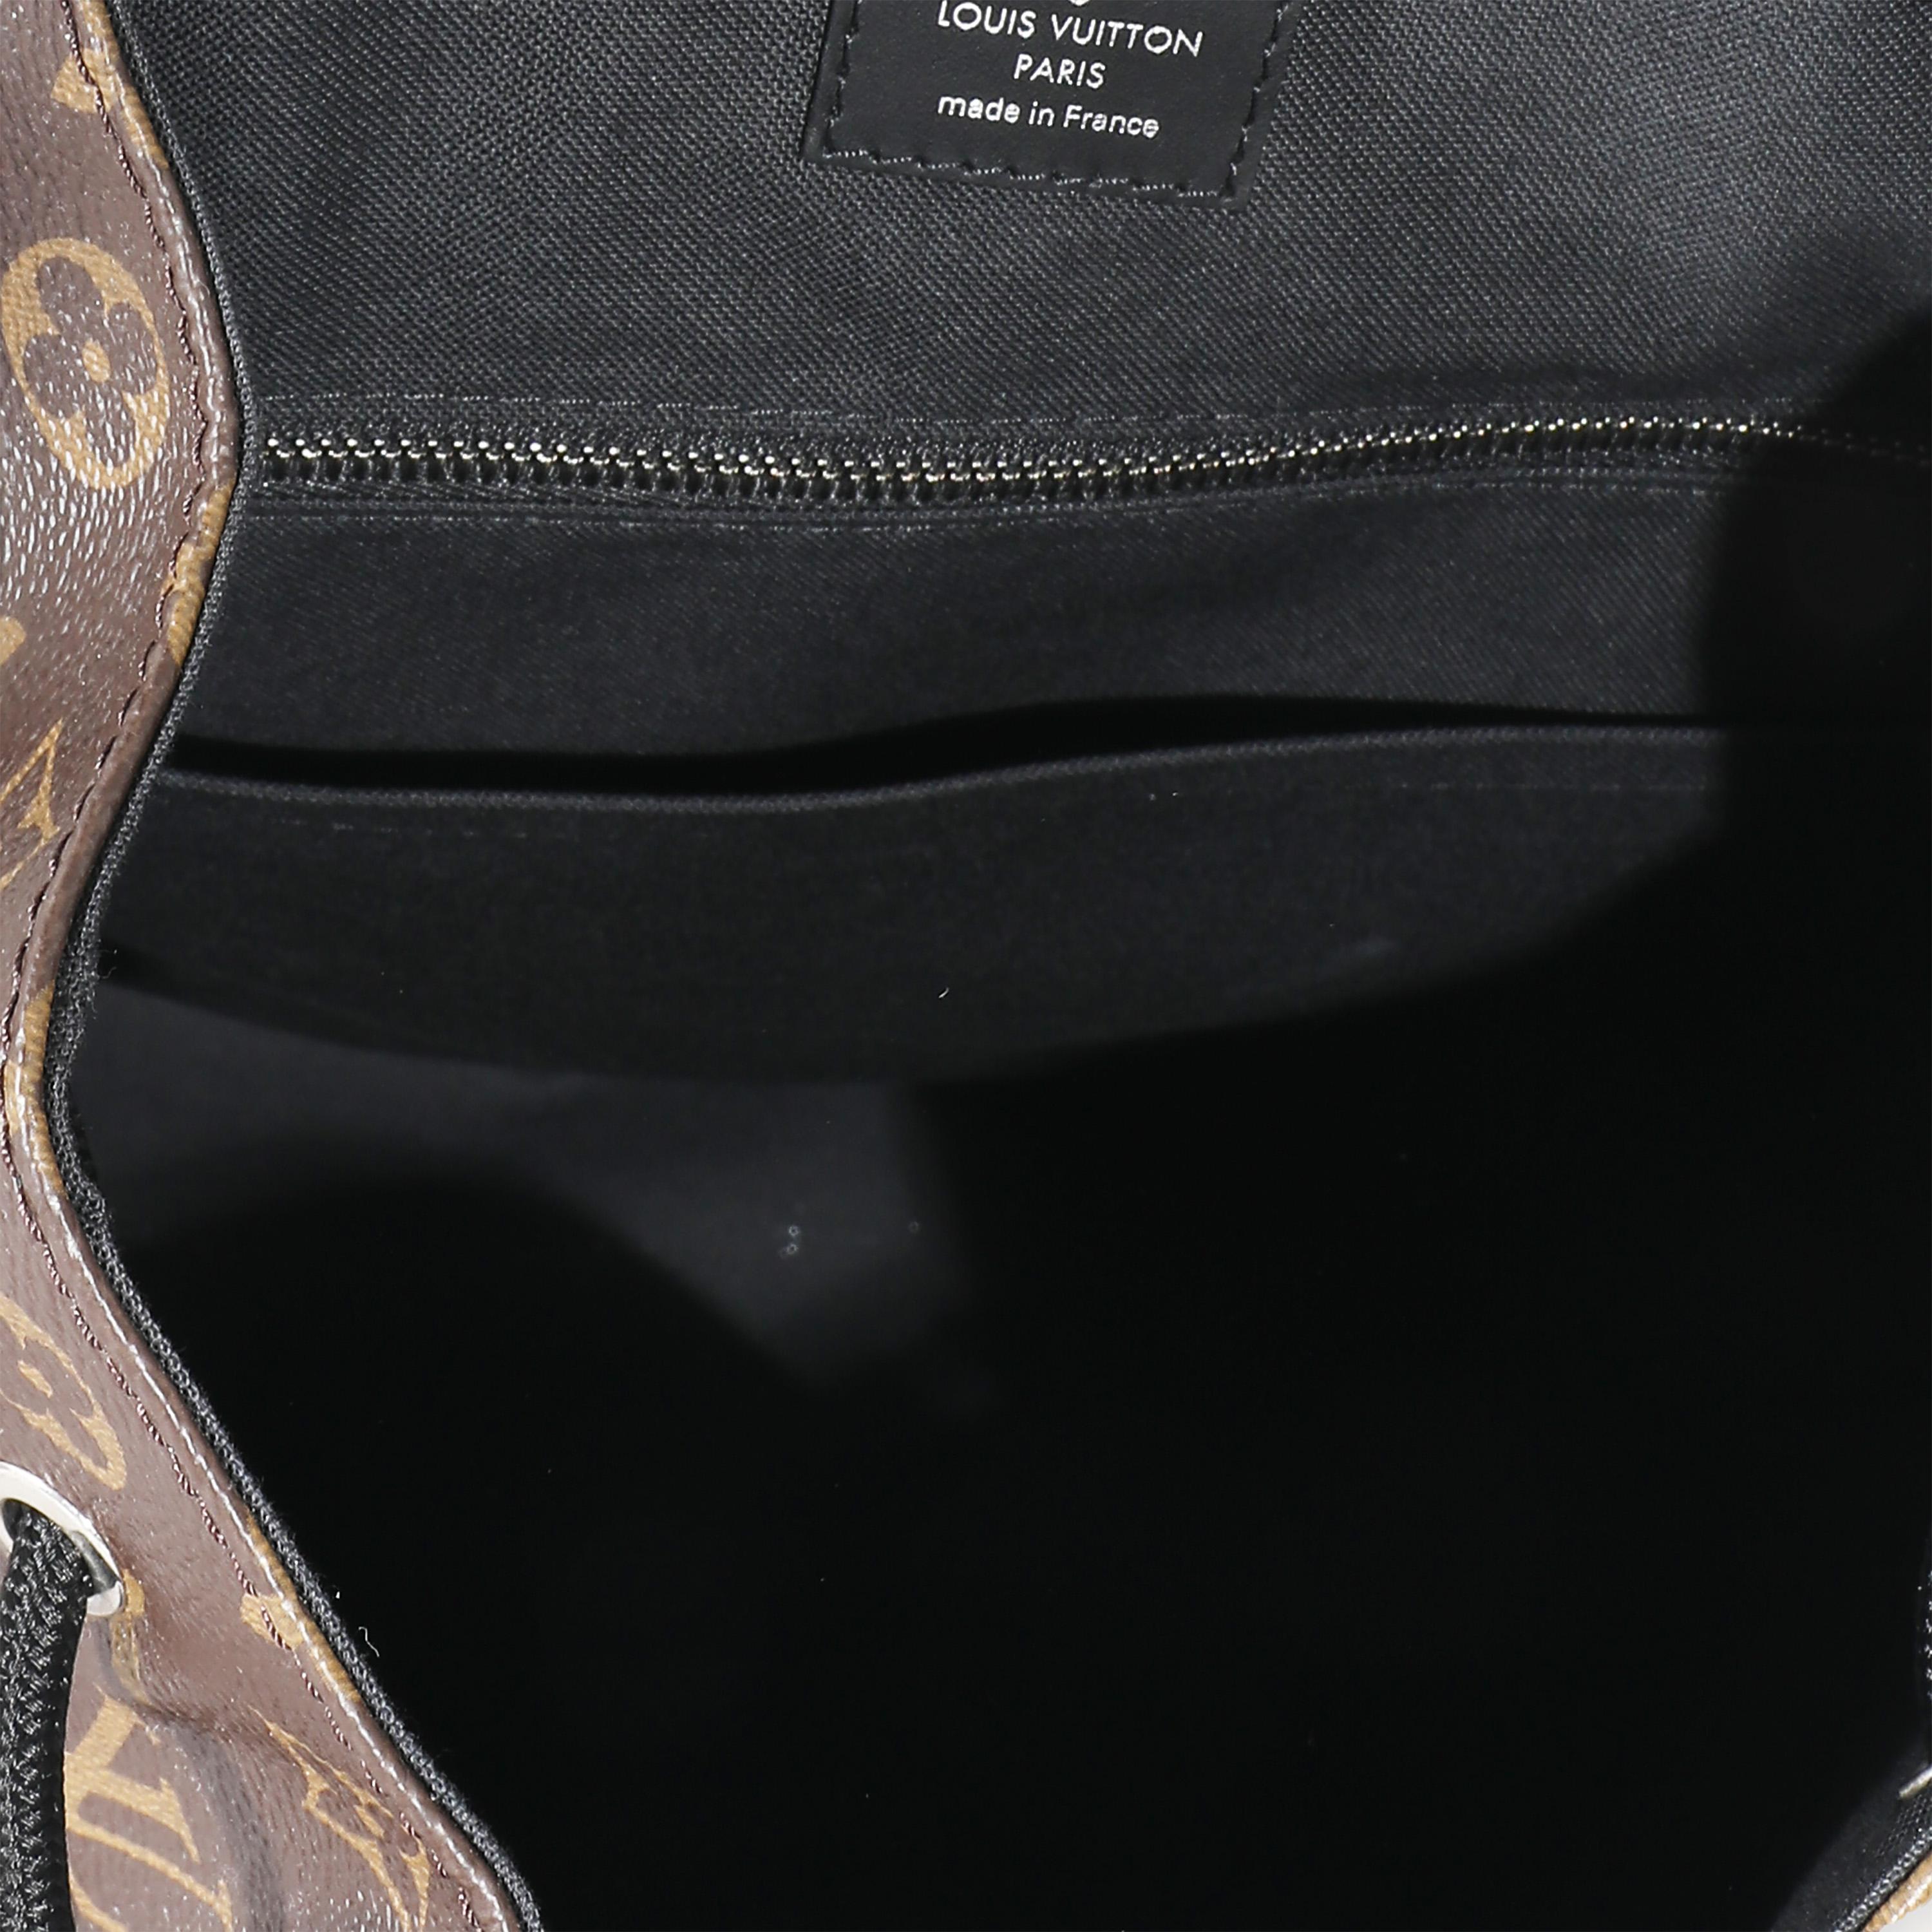 Listing Title: Louis Vuitton Monogram Macassar Christopher Backpack PM
SKU: 133755
MSRP: 3300.00 USD
Condition: Pre-owned 
Handbag Condition: Excellent
Condition Comments: Item is in excellent condition and displays light signs of wear. Faint